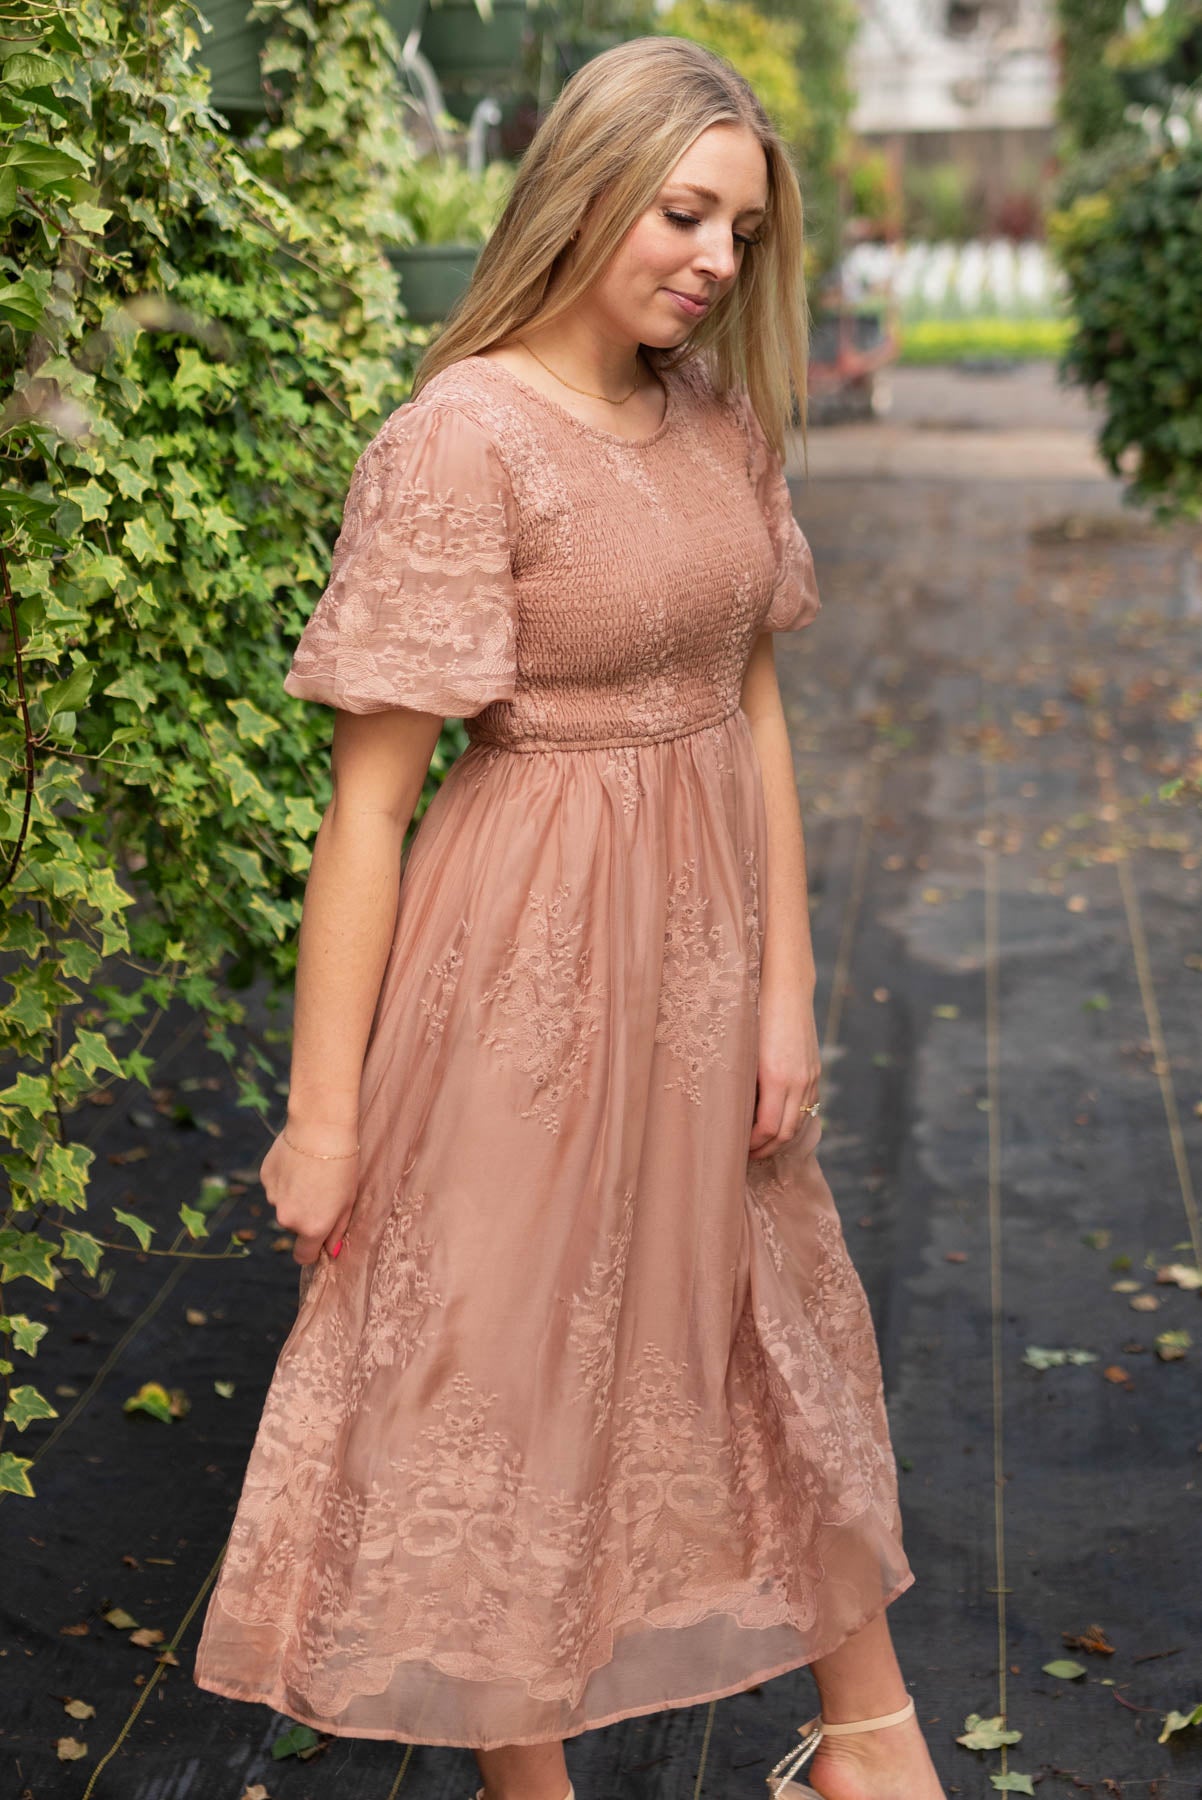 Side view of the dusty pink embroidered dress